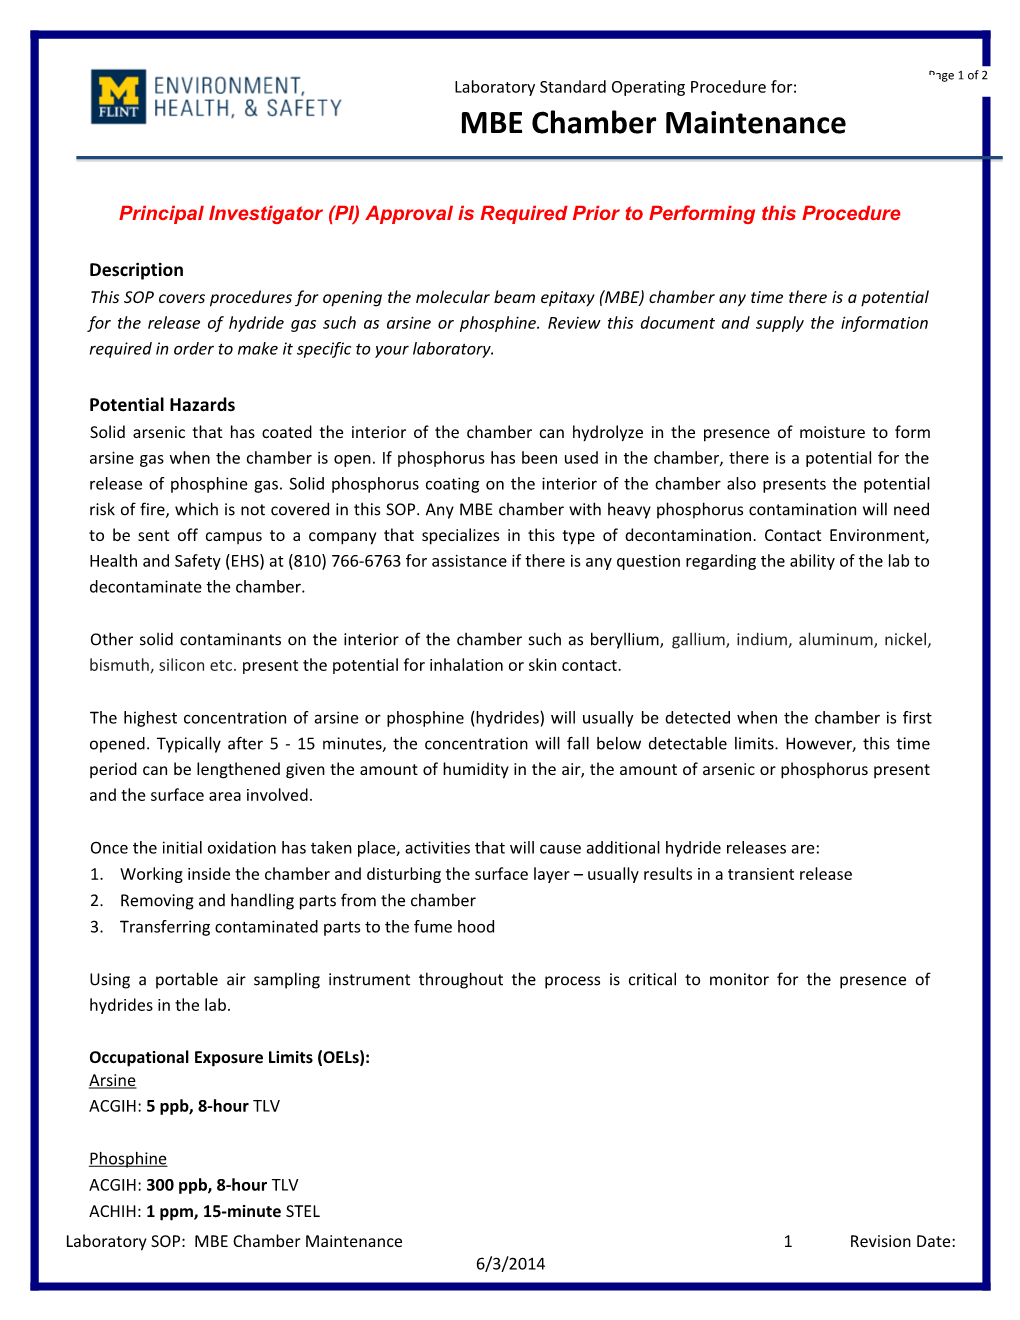 Principal Investigator (PI) Approval Is Required Prior to Performing This Procedure